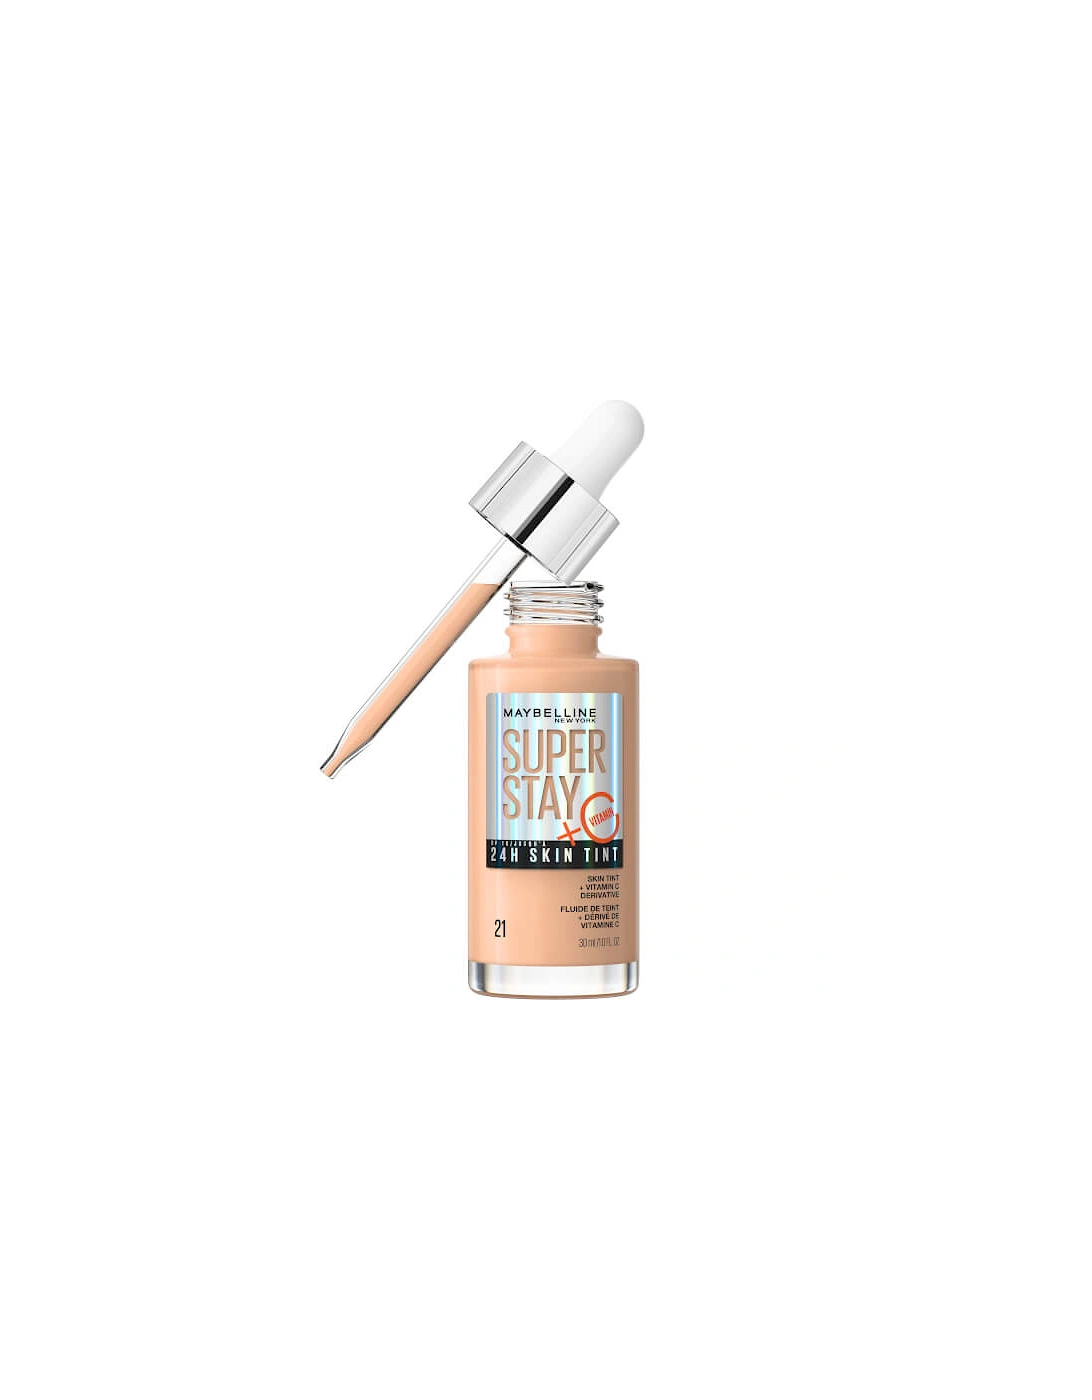 Super Stay up to 24H Skin Tint Foundation + Vitamin C - Shade 21, 2 of 1